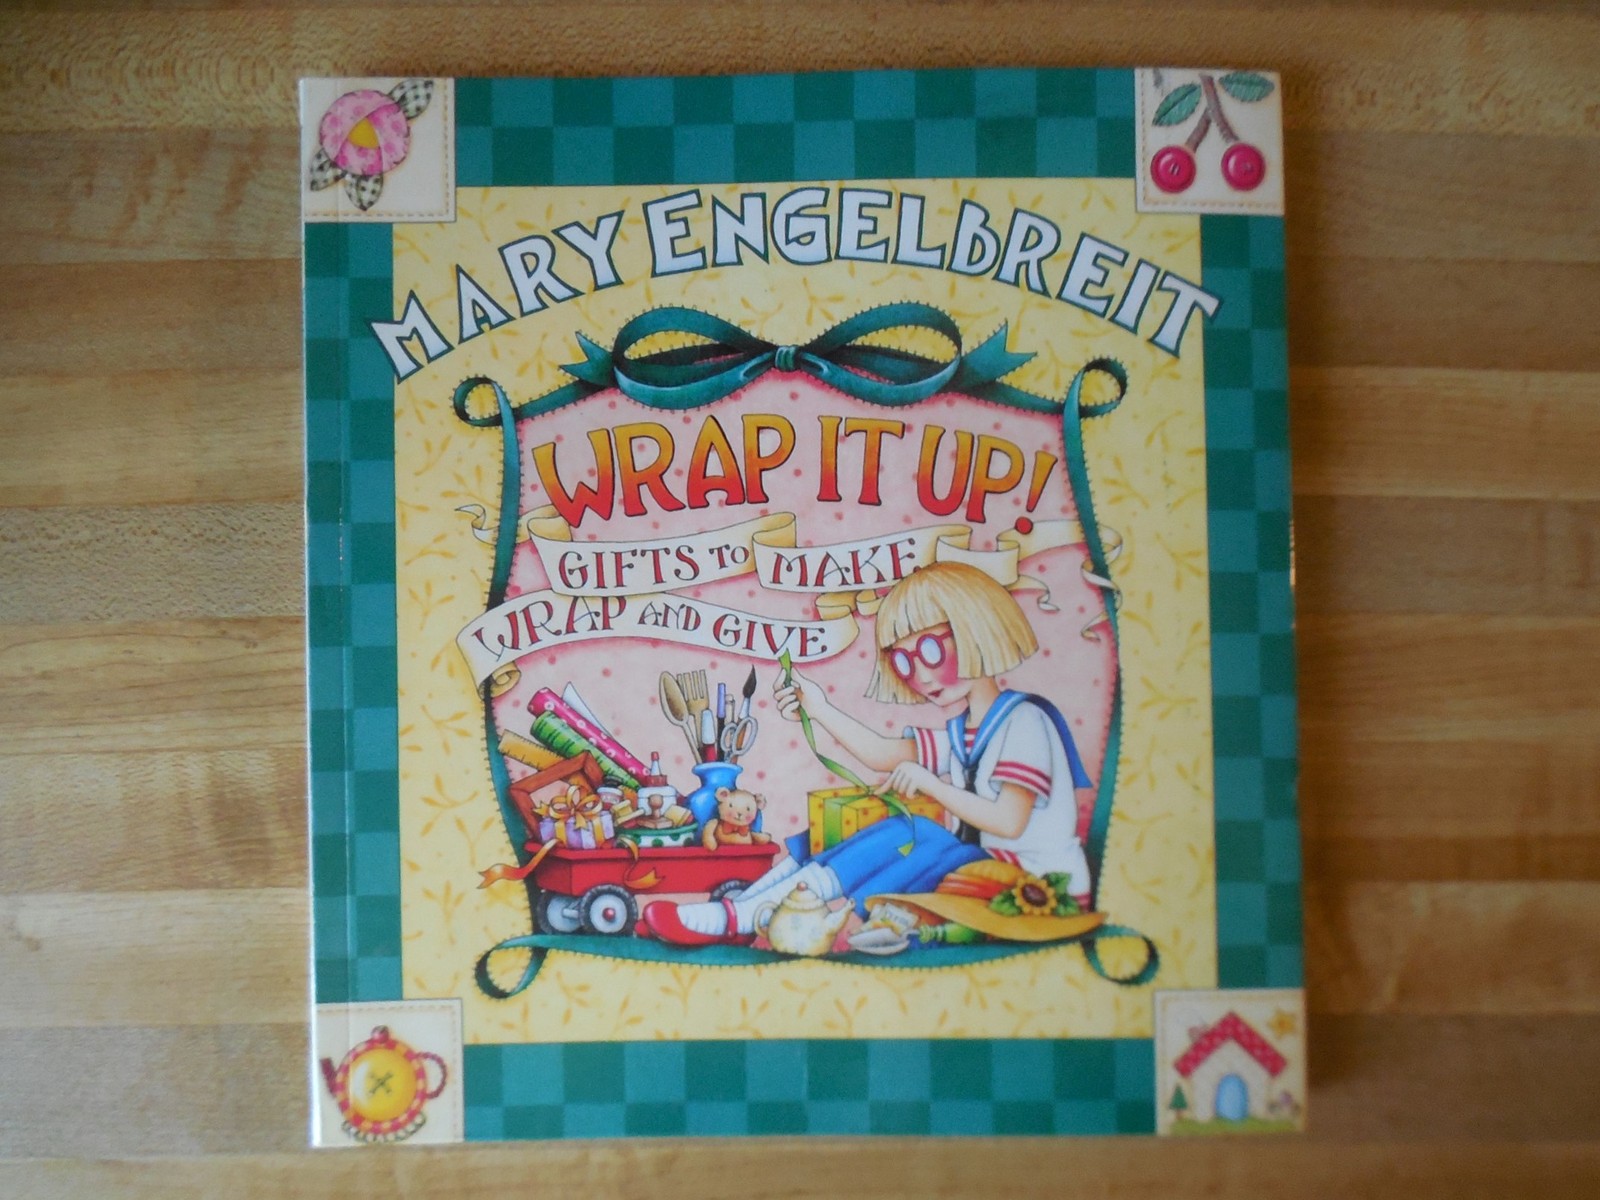 Primary image for Mary Engelbreit Wrap it Up! Gifts To Make - Wrap and Give 2004 publication